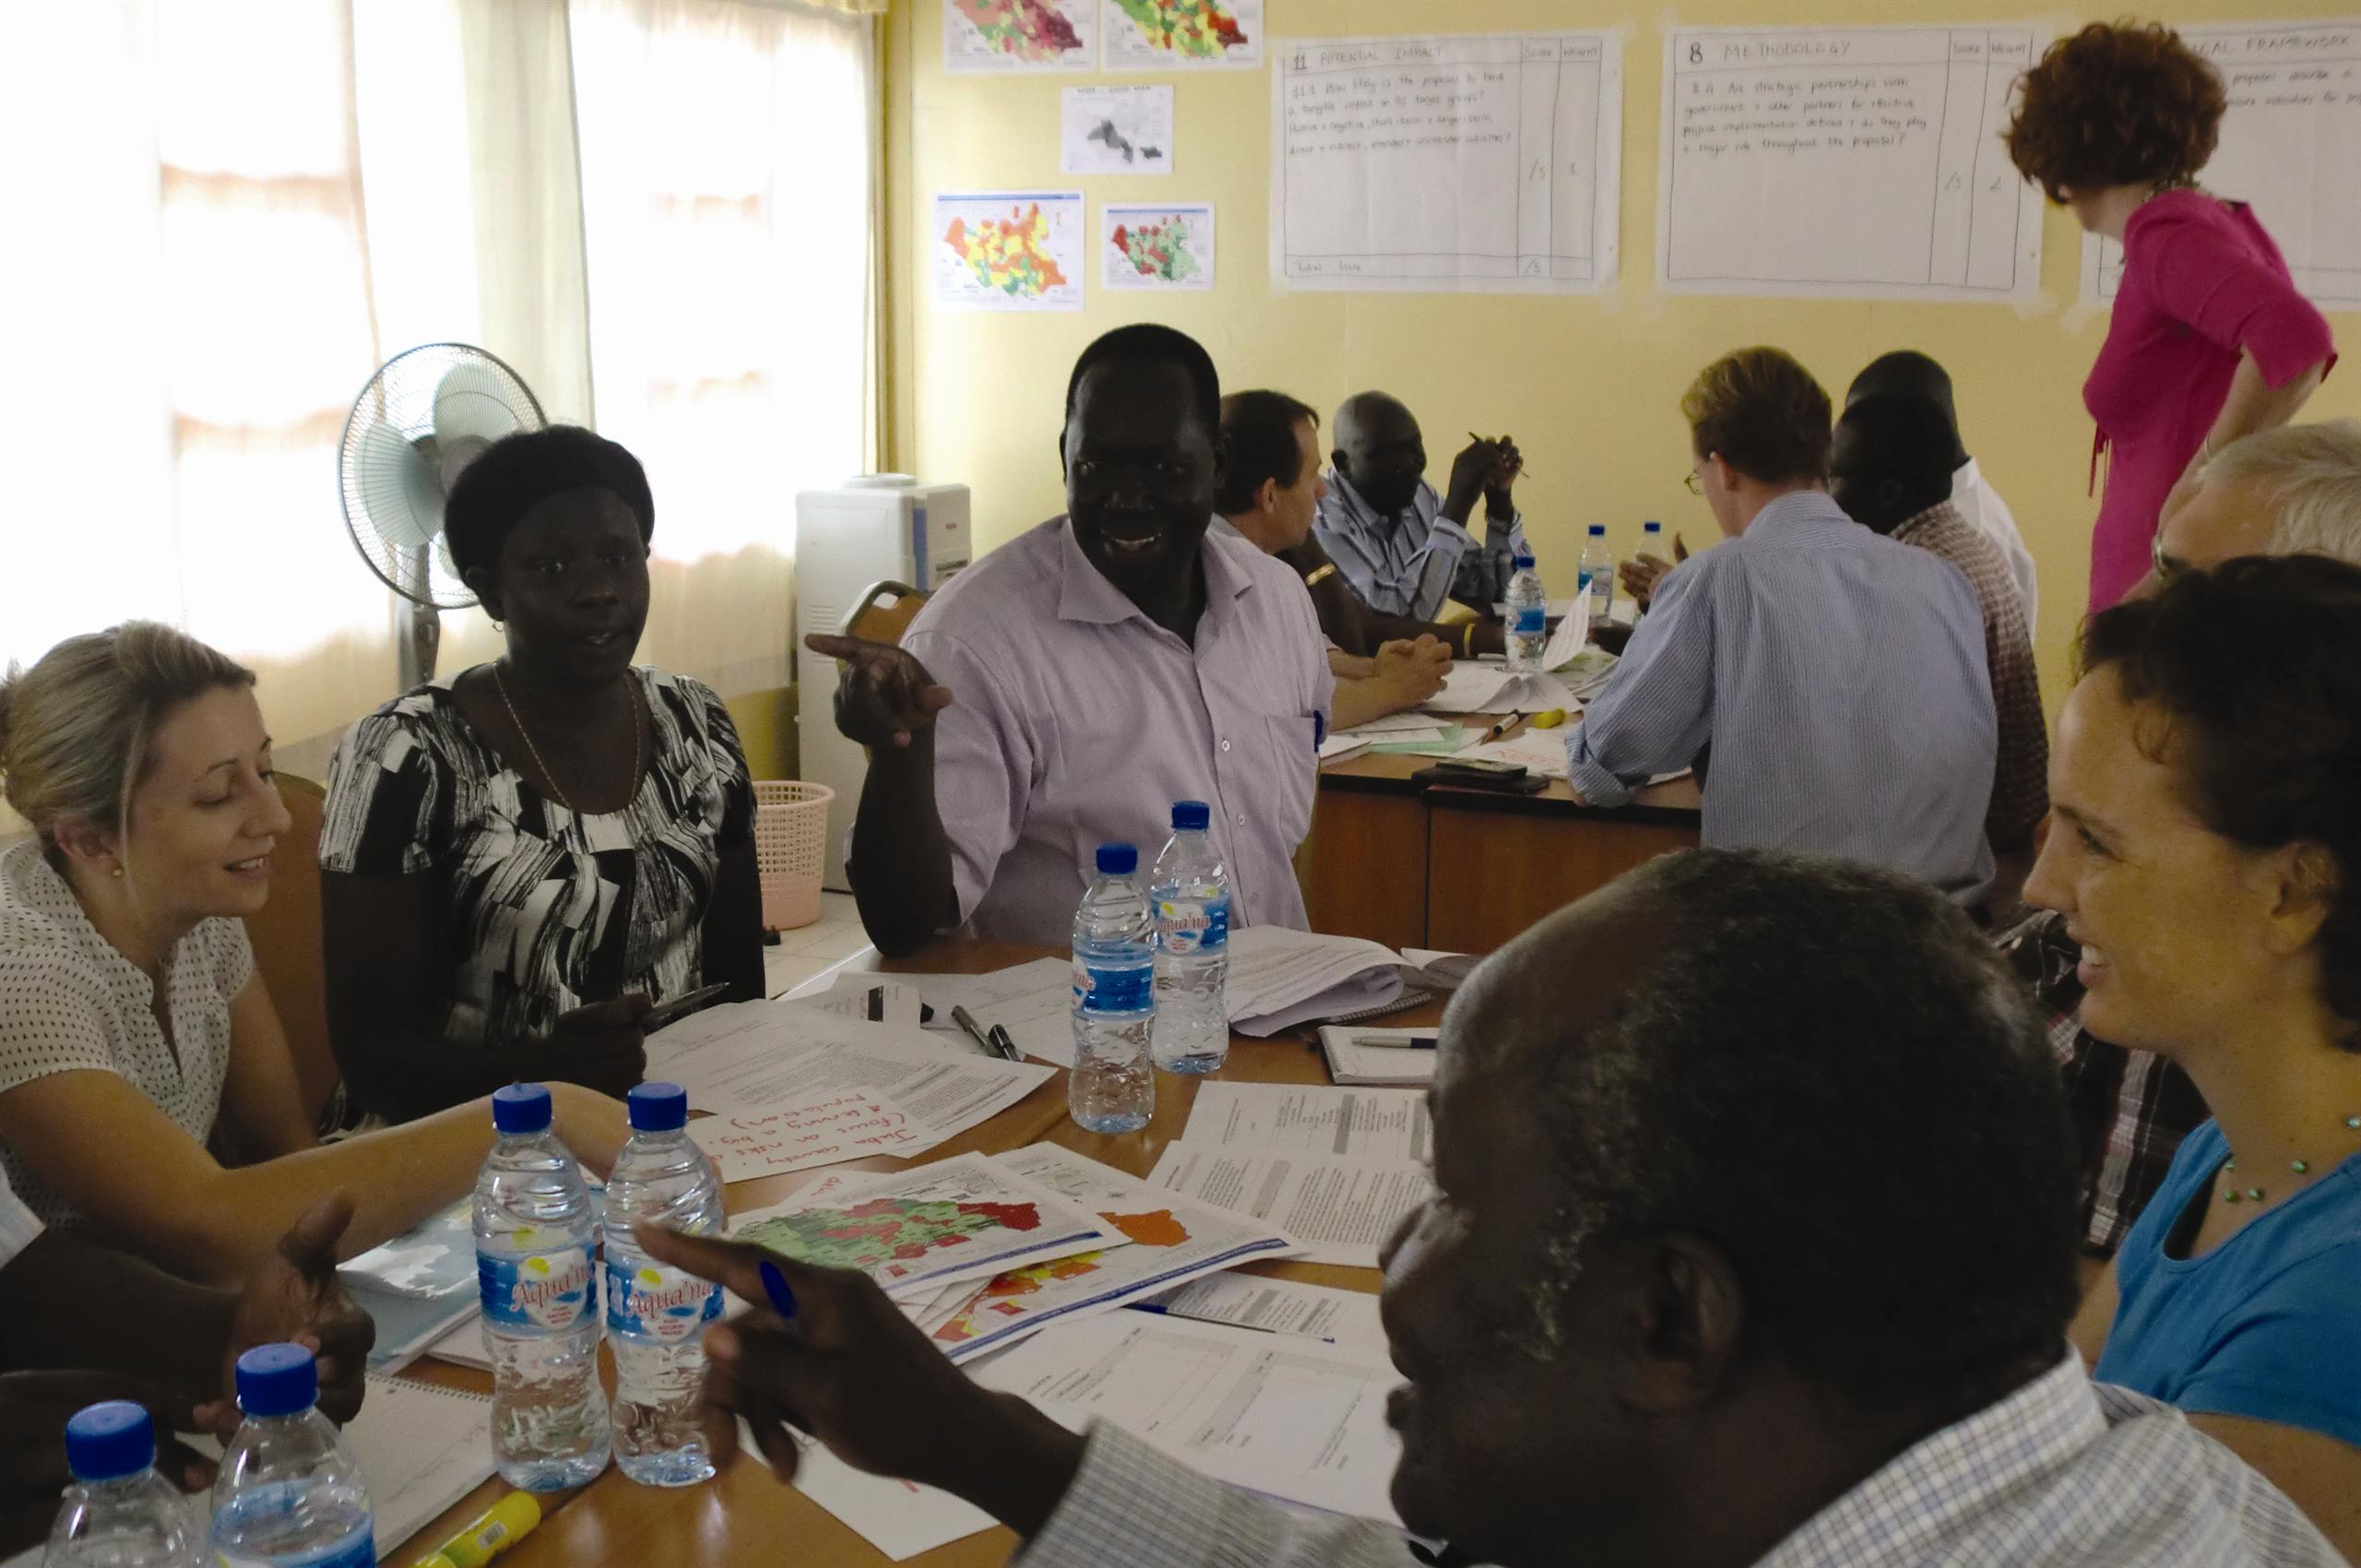 Our rigorous approach to procurement of management and non-governmental organisations (NGO) service providers in war-torn Southern Sudan achieved a 10% increase in aid delivered – with no extra budget.